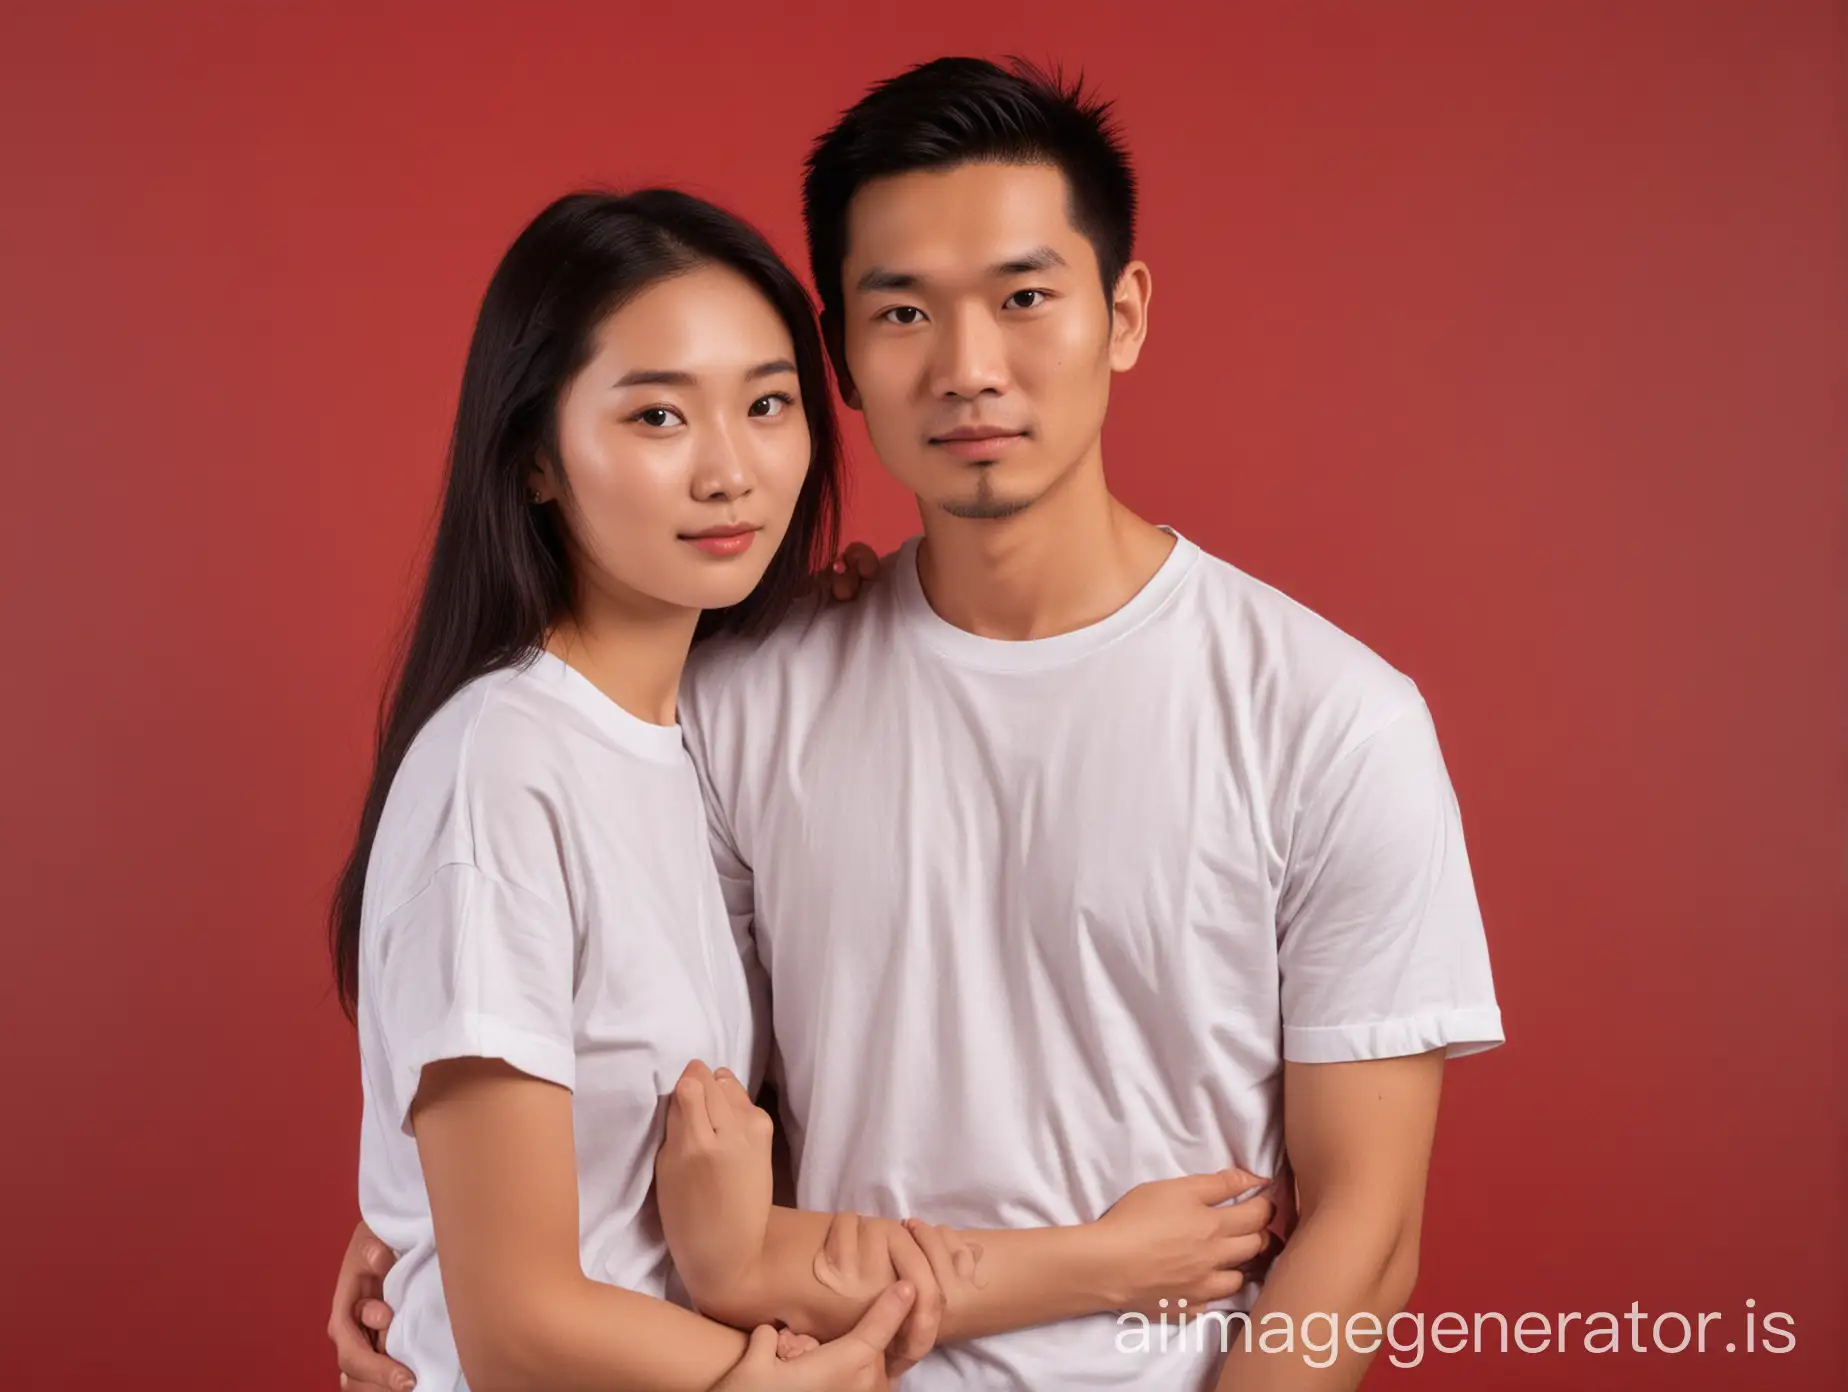 Photo of lovers, two people, Asian, side by side, face front, red background, no text in the background, white T-shirt, lady on the right side of gentleman, lady in front of gentleman